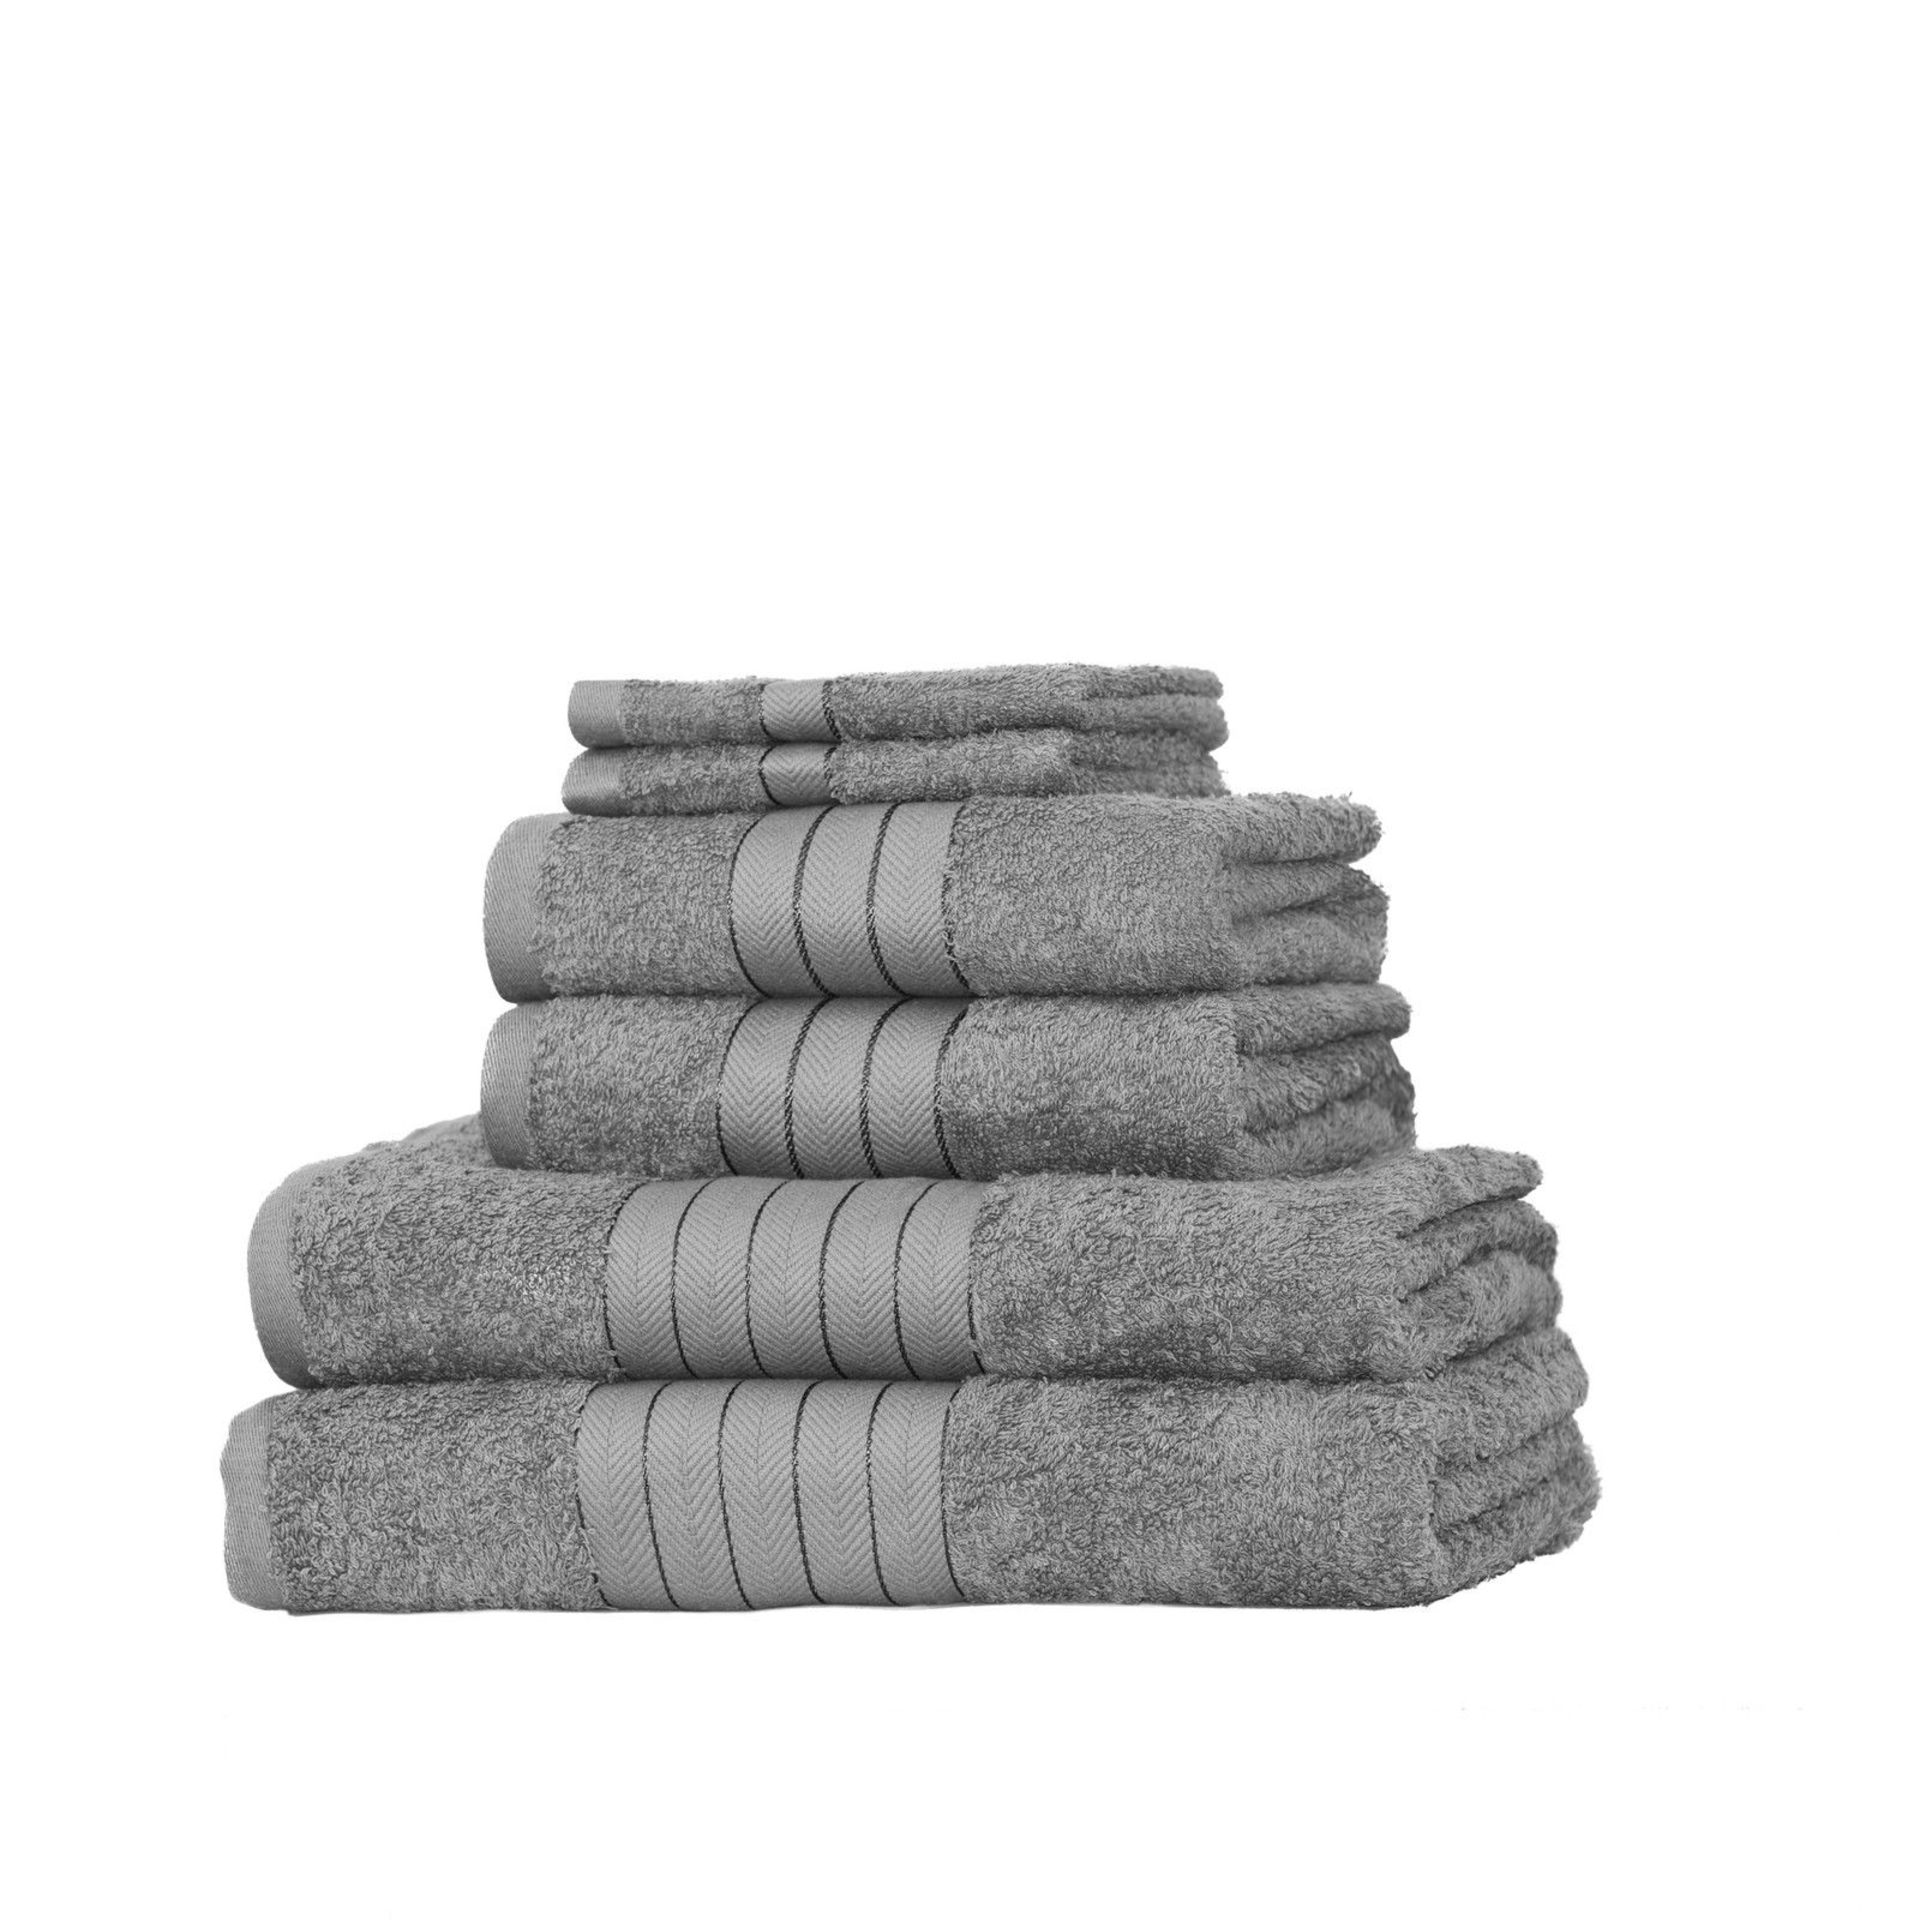 V *TRADE QTY* Brand New Grey 6 Piece Towel Bale Set With 2 Face Towels - 2 Hand Towels - 1 Bath